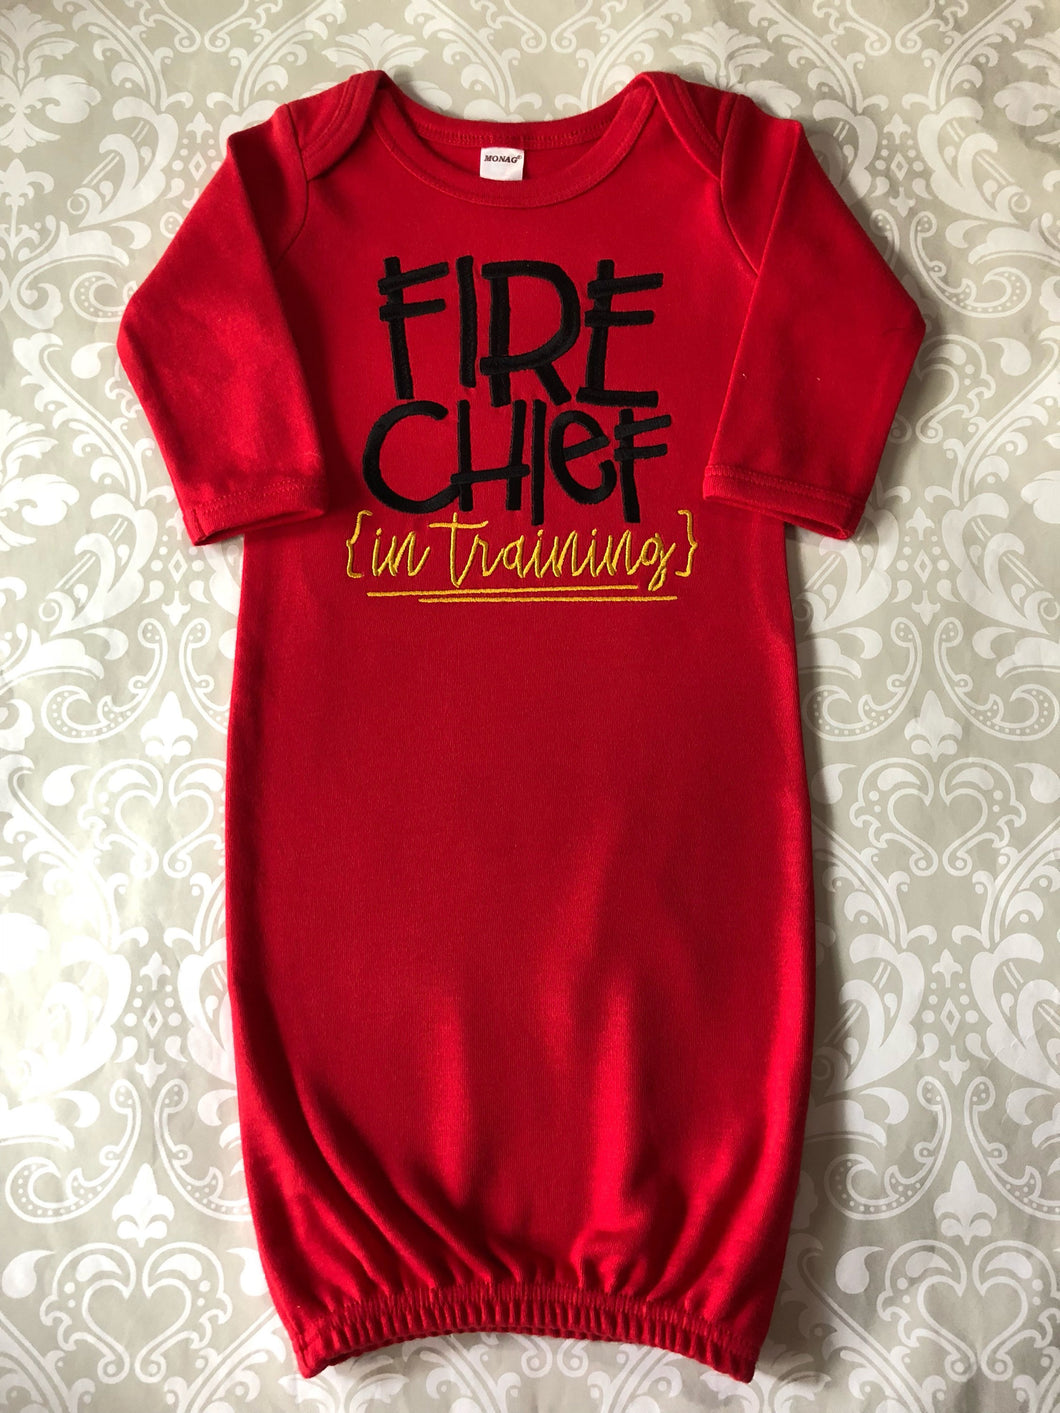 Fire chief in training red baby gown